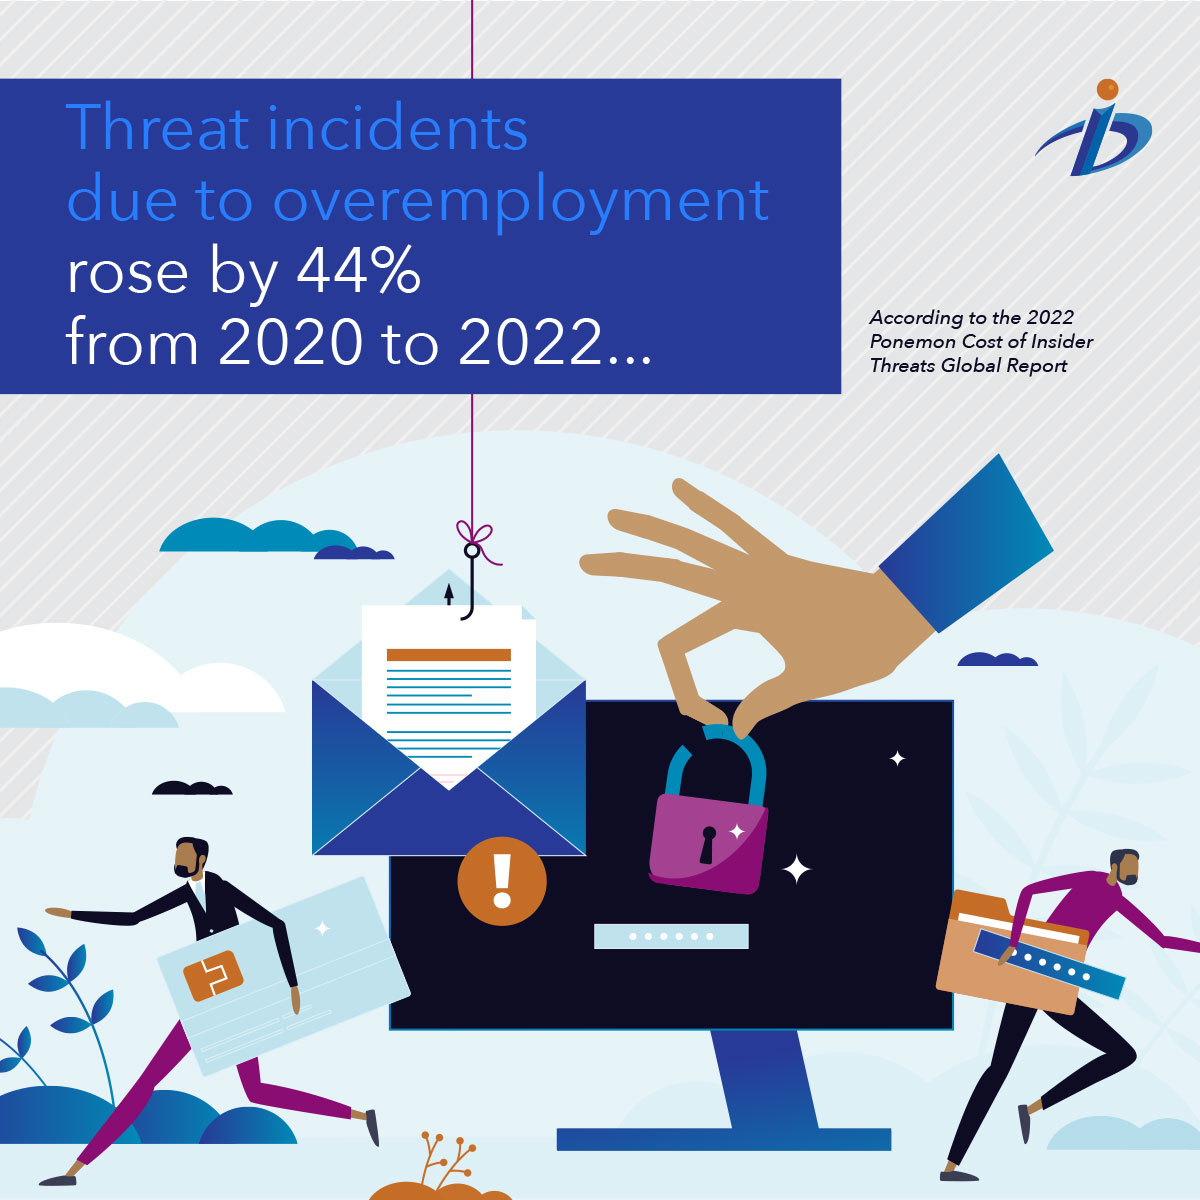 "Threat incidents due to overemployment rose by 44% from 2020 to 2022..." vector data theft illustration